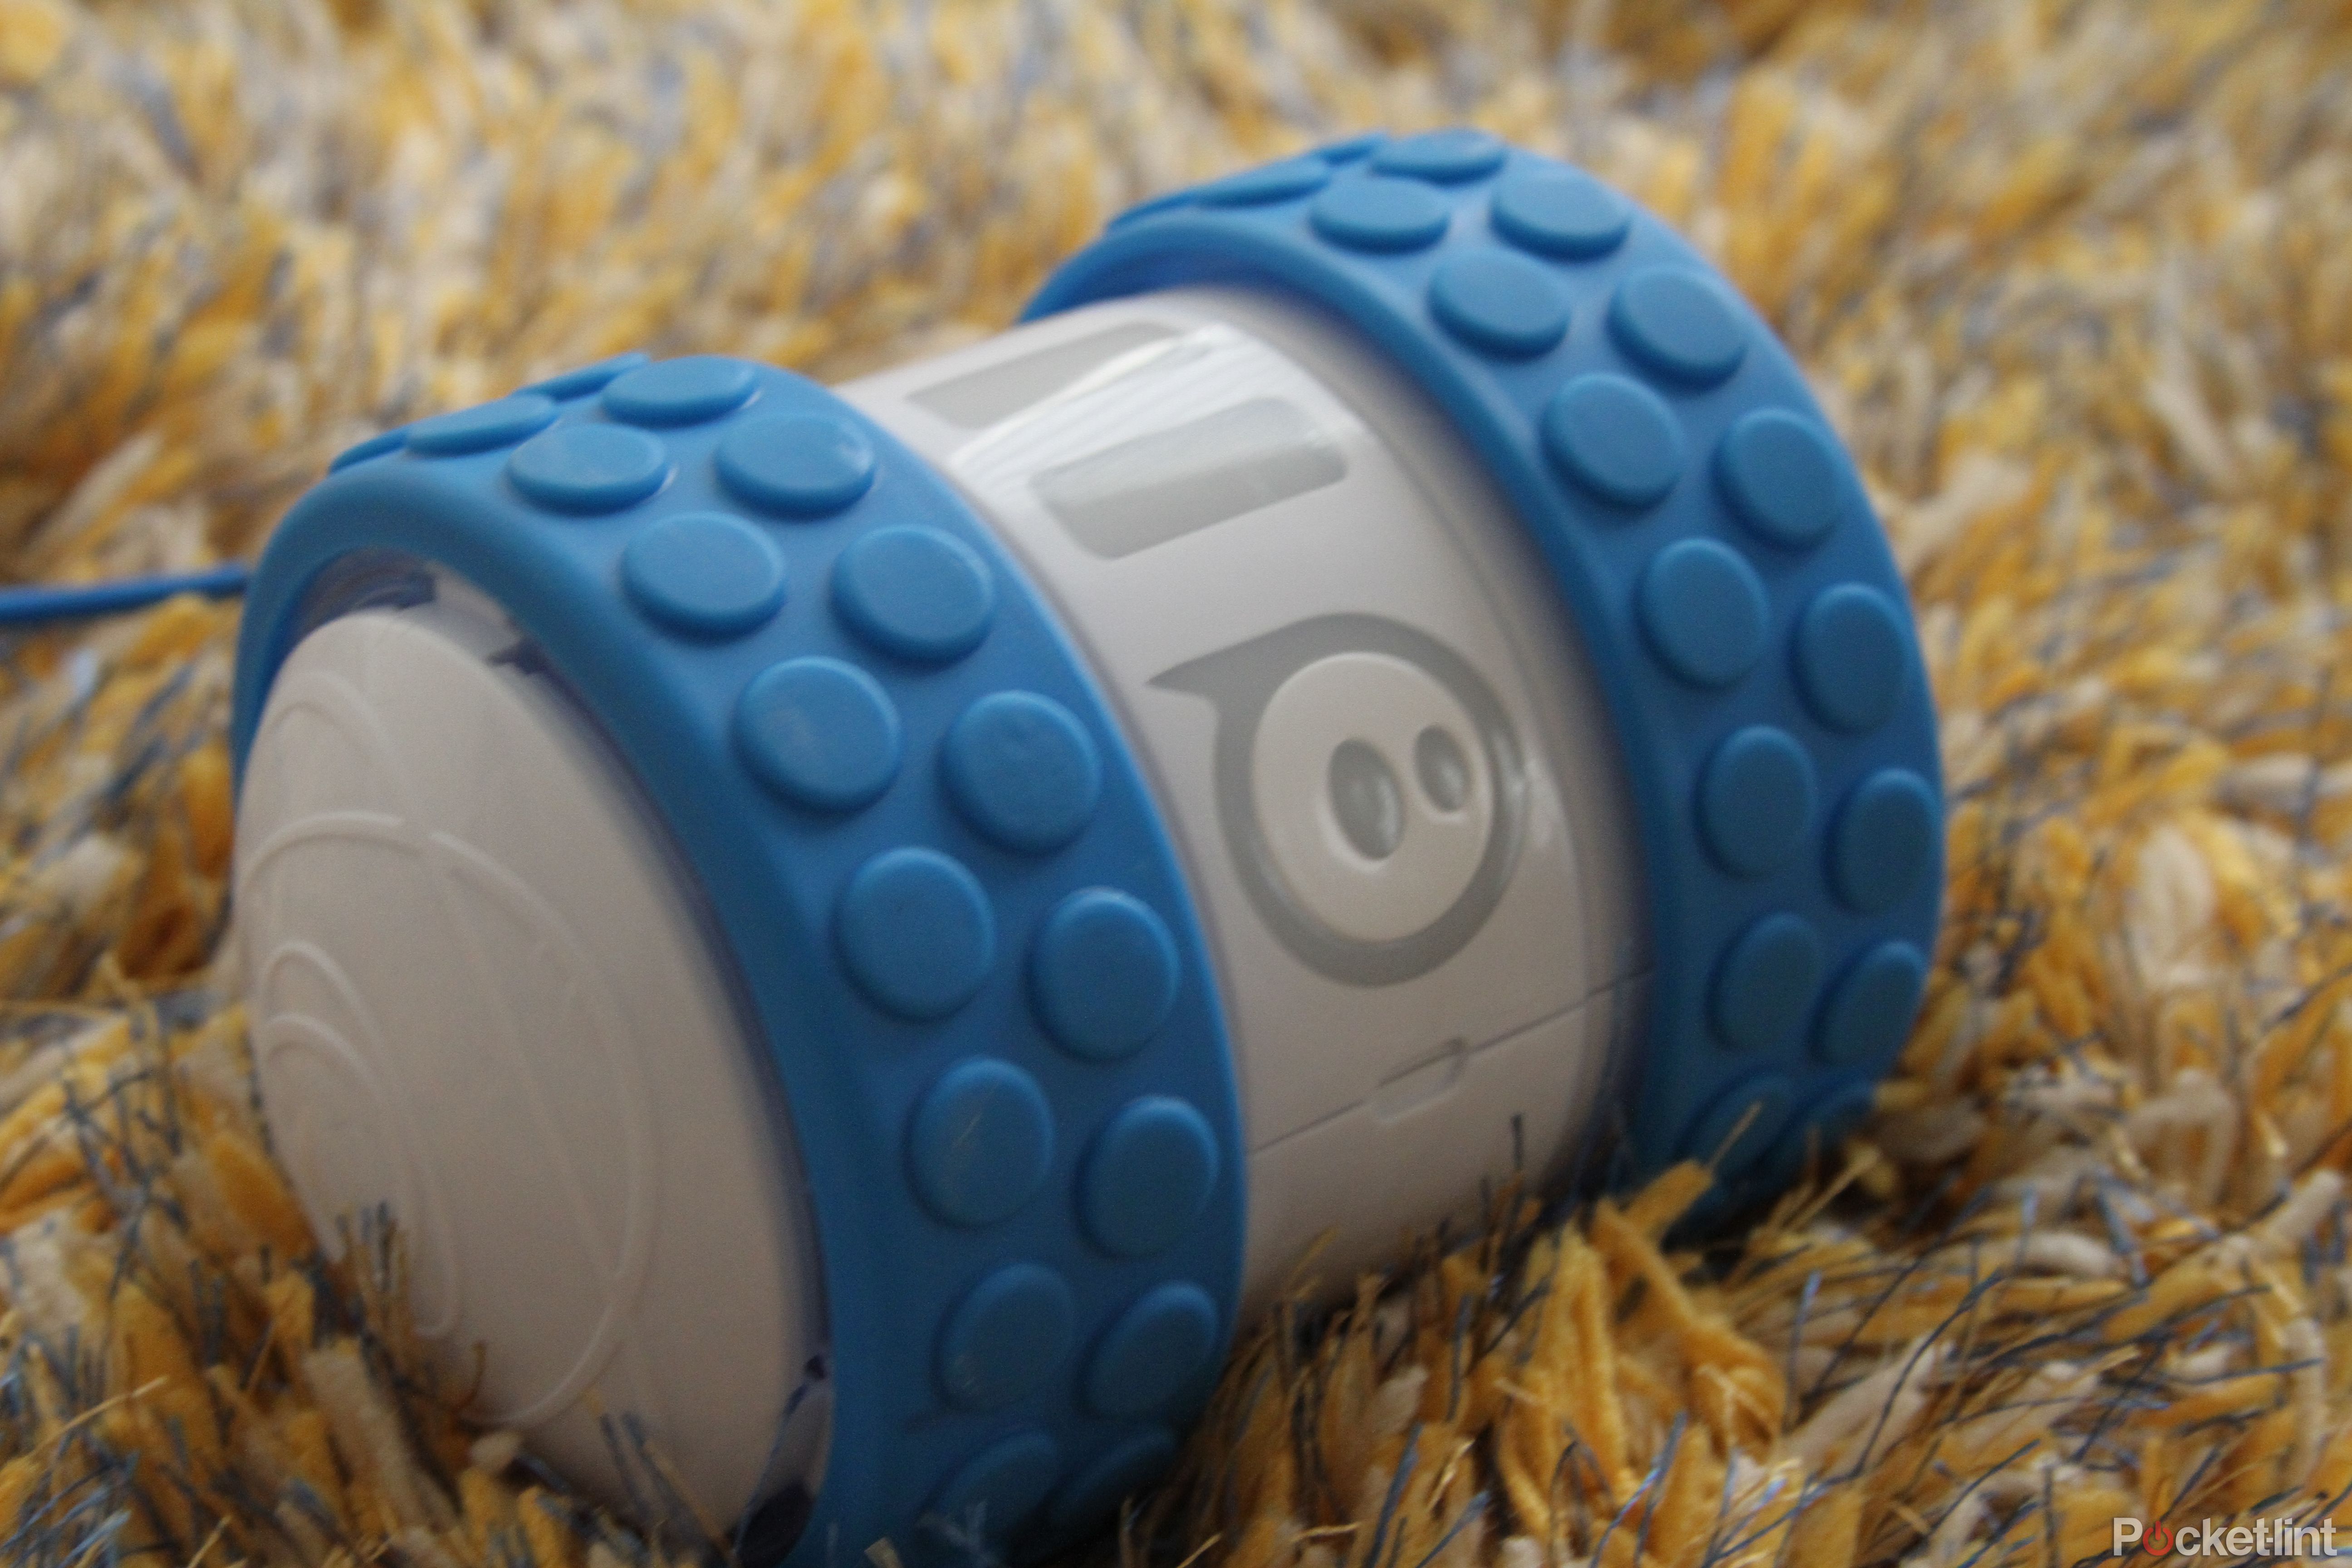 https://static0.pocketlintimages.com/wordpress/wp-content/uploads/wm/130719-parenting-news-hands-on-sphero-ollie-hands-on-review-cylindrical-fast-and-totally-cool-image12-JAz9VM5KBH.jpg